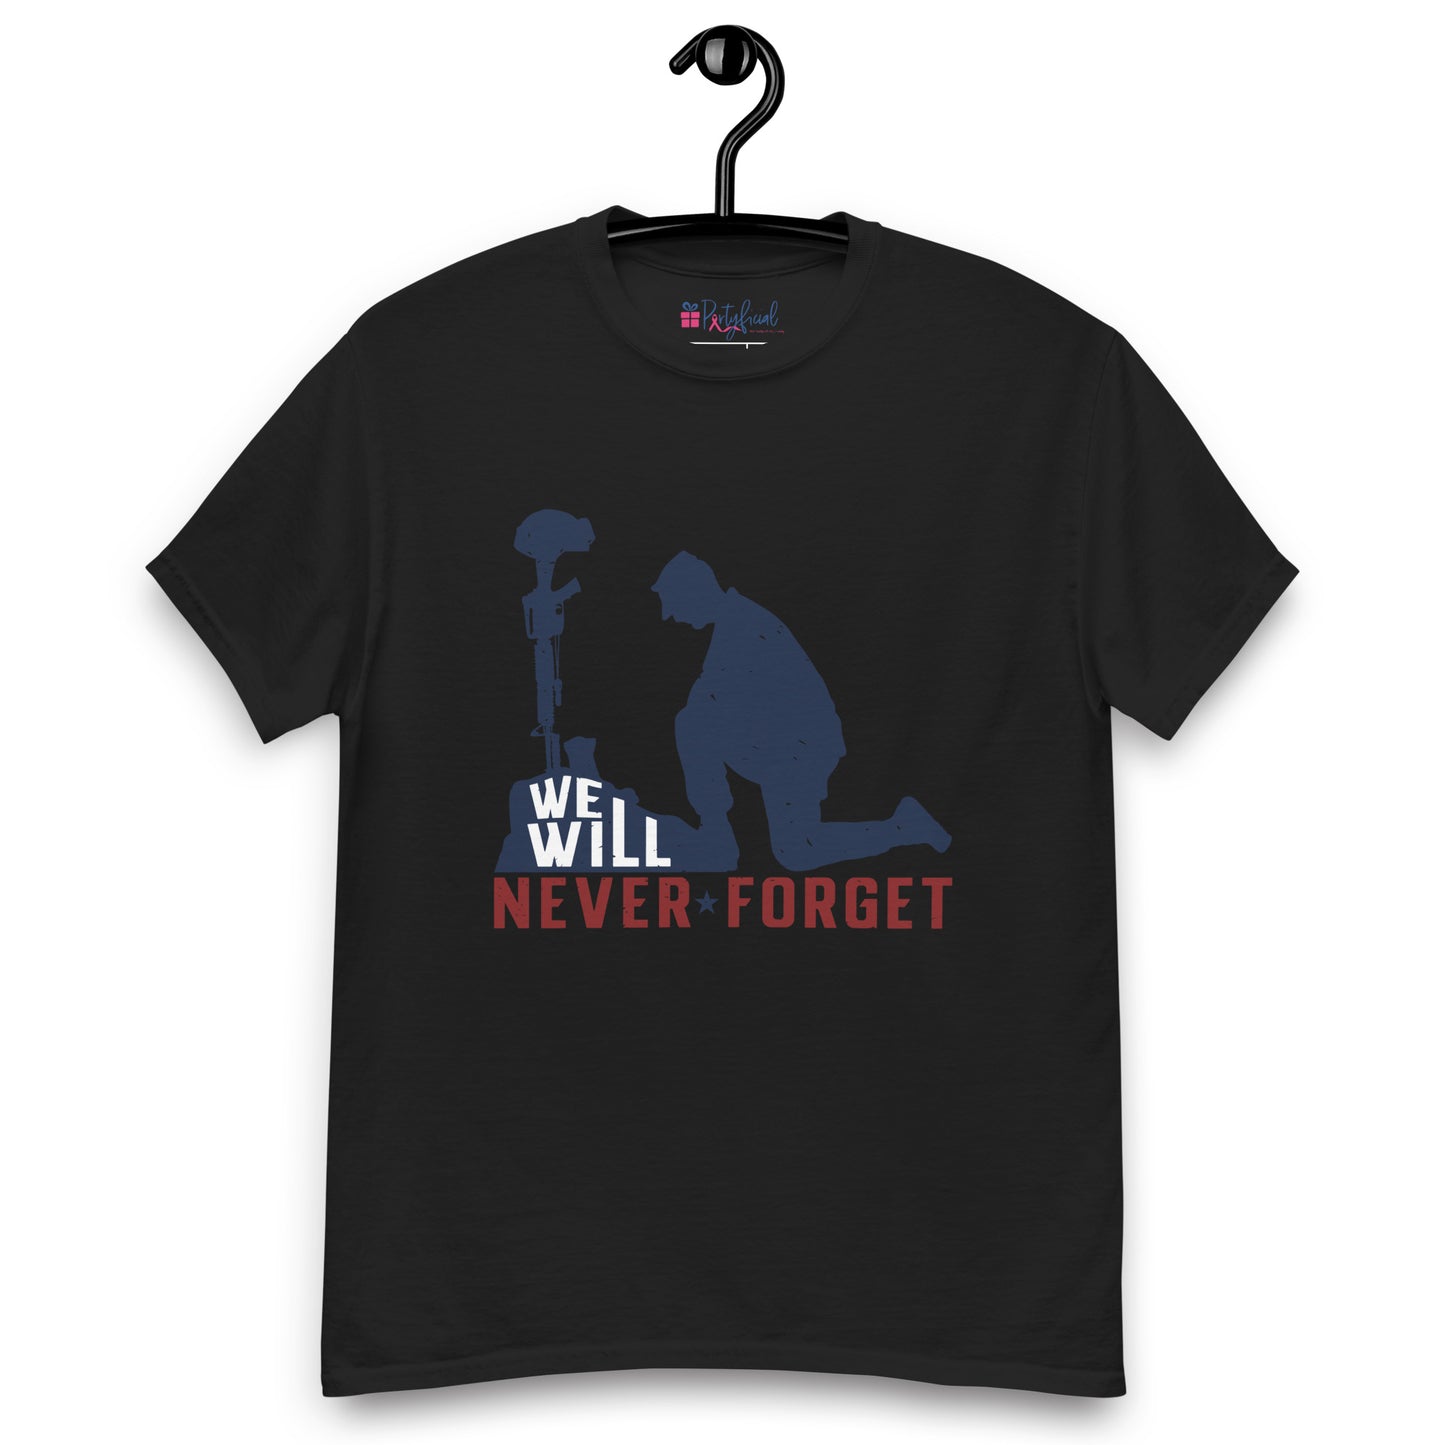 Never Forget tee